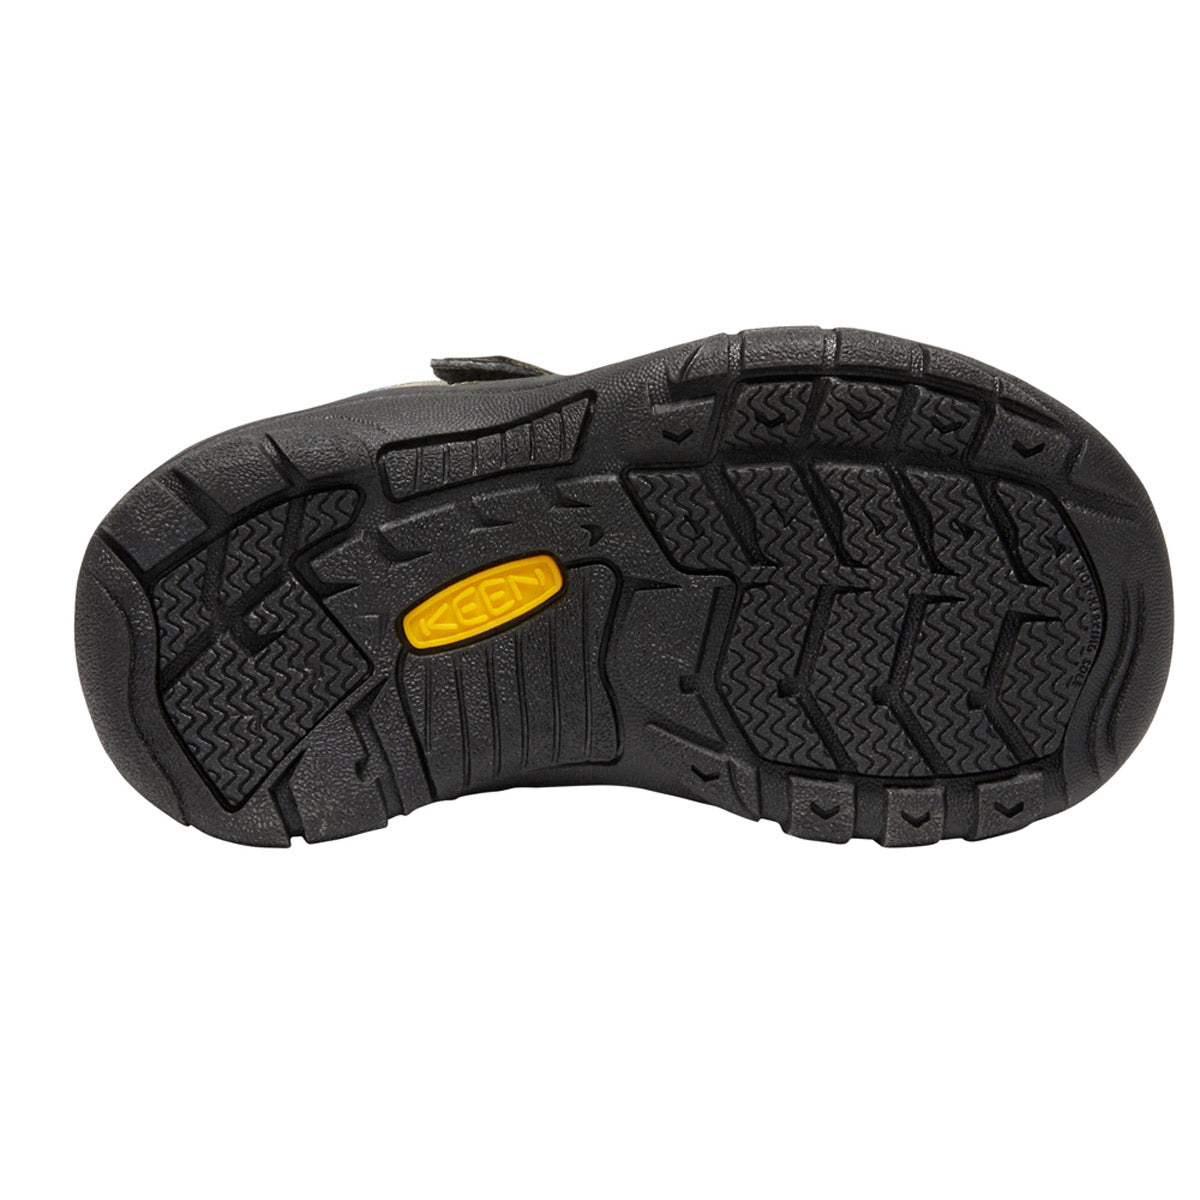 Black rubber sole of a KEEN NEWPORT SHOE STEEL GREY/BRILLANT BLUE - KIDS with tread pattern and a yellow Keen logo.